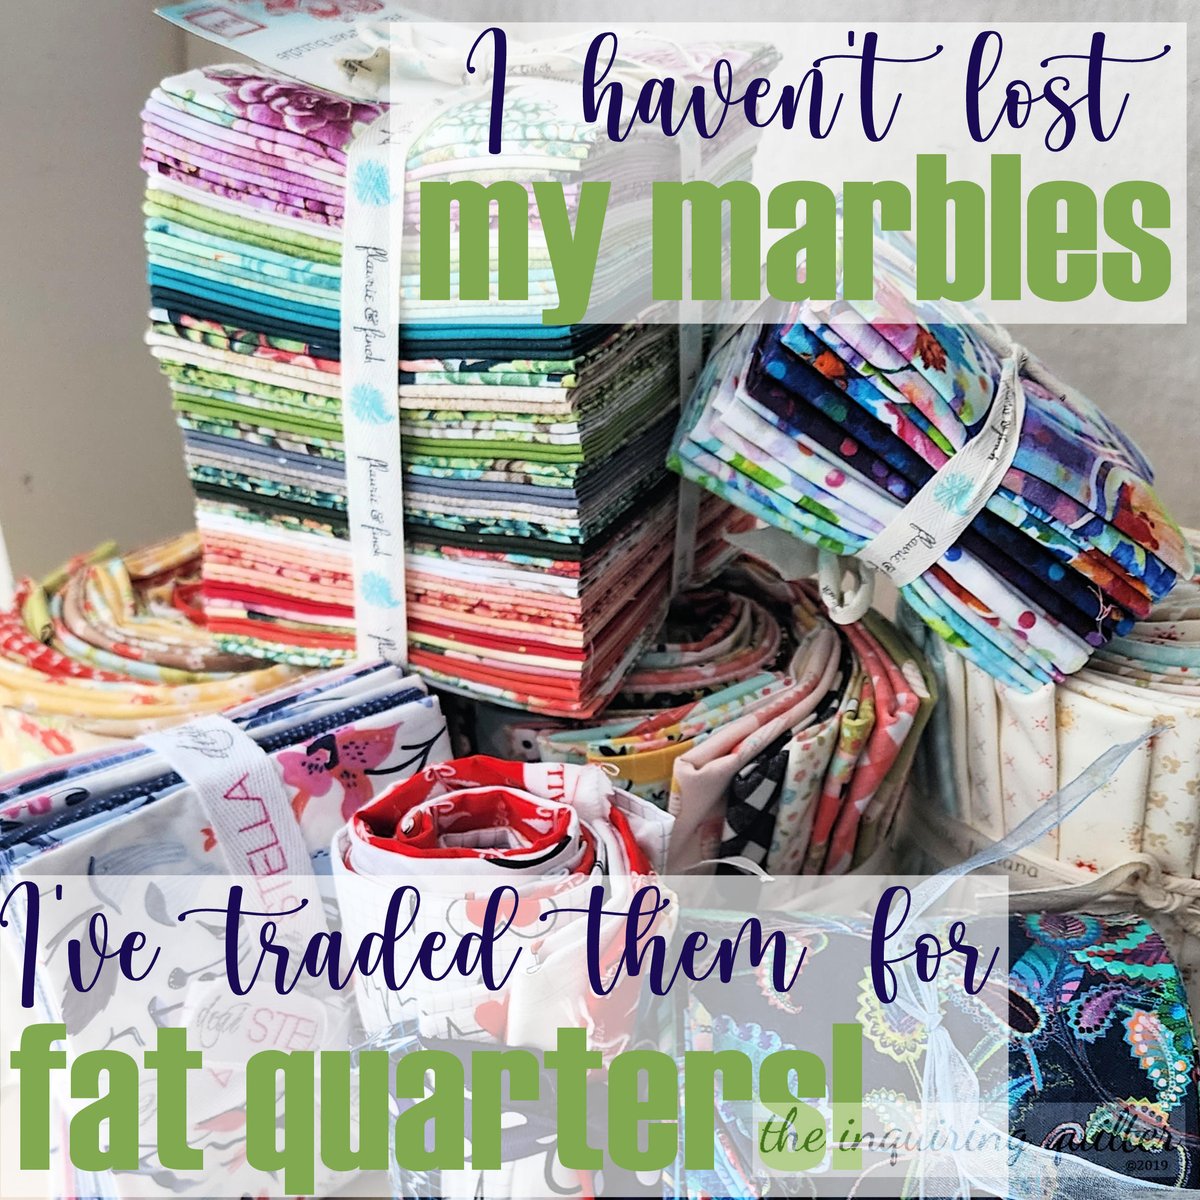 Really! I'm not crazy. I'm just an enthusiastic curator of quilt fabric. 🤣 #inquiringquilter #quiltingismytherapy #quiltingismybliss #quotestoliveby #quoteoftheday #quotes #quotesaboutlife #behappyandsmile #findyourjoy #quiltquotes